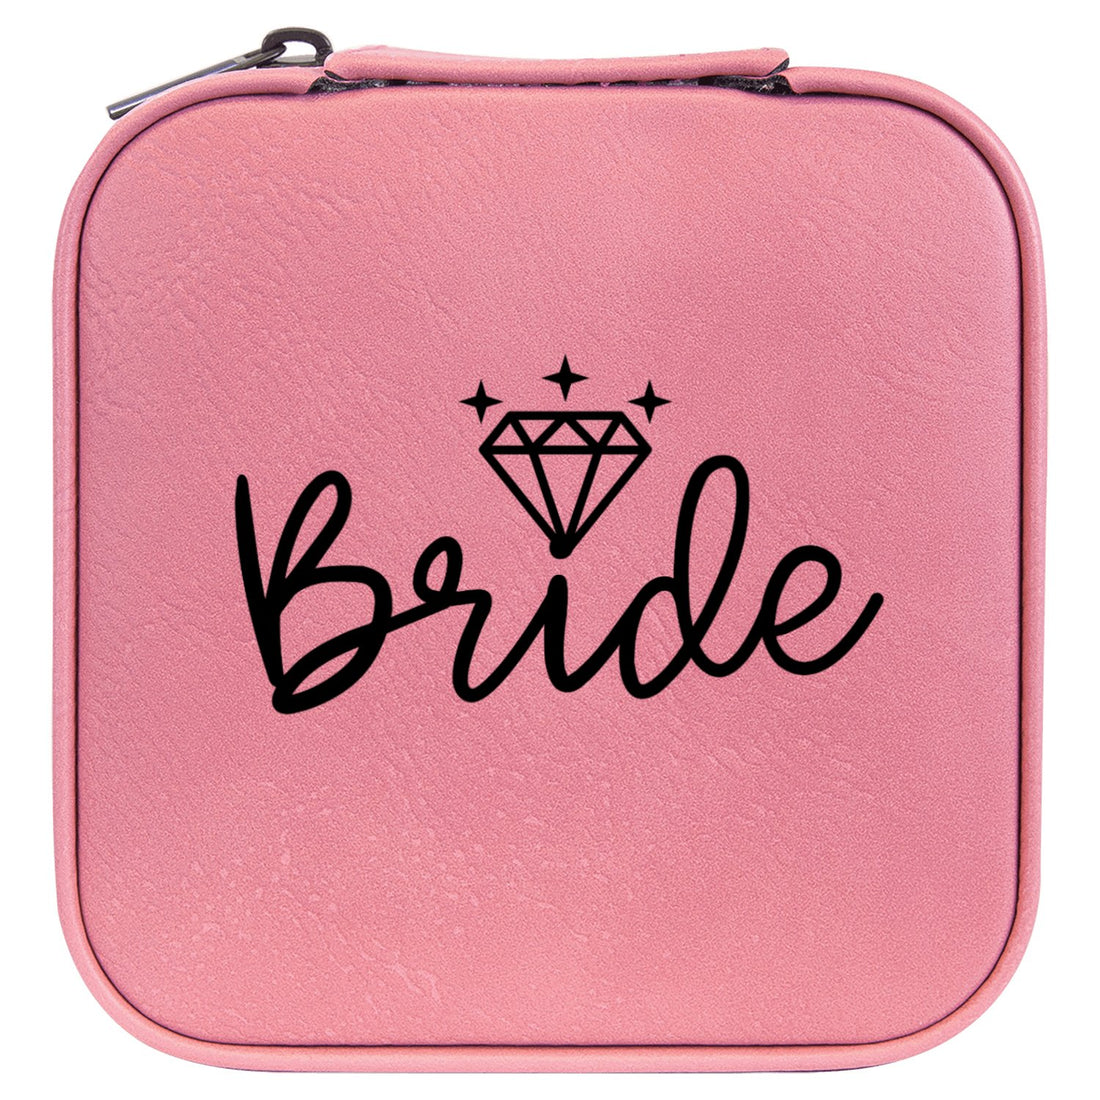 I Am The Bride Jewelry Organizer - Positively Sassy - I Am The Bride Jewelry Organizer